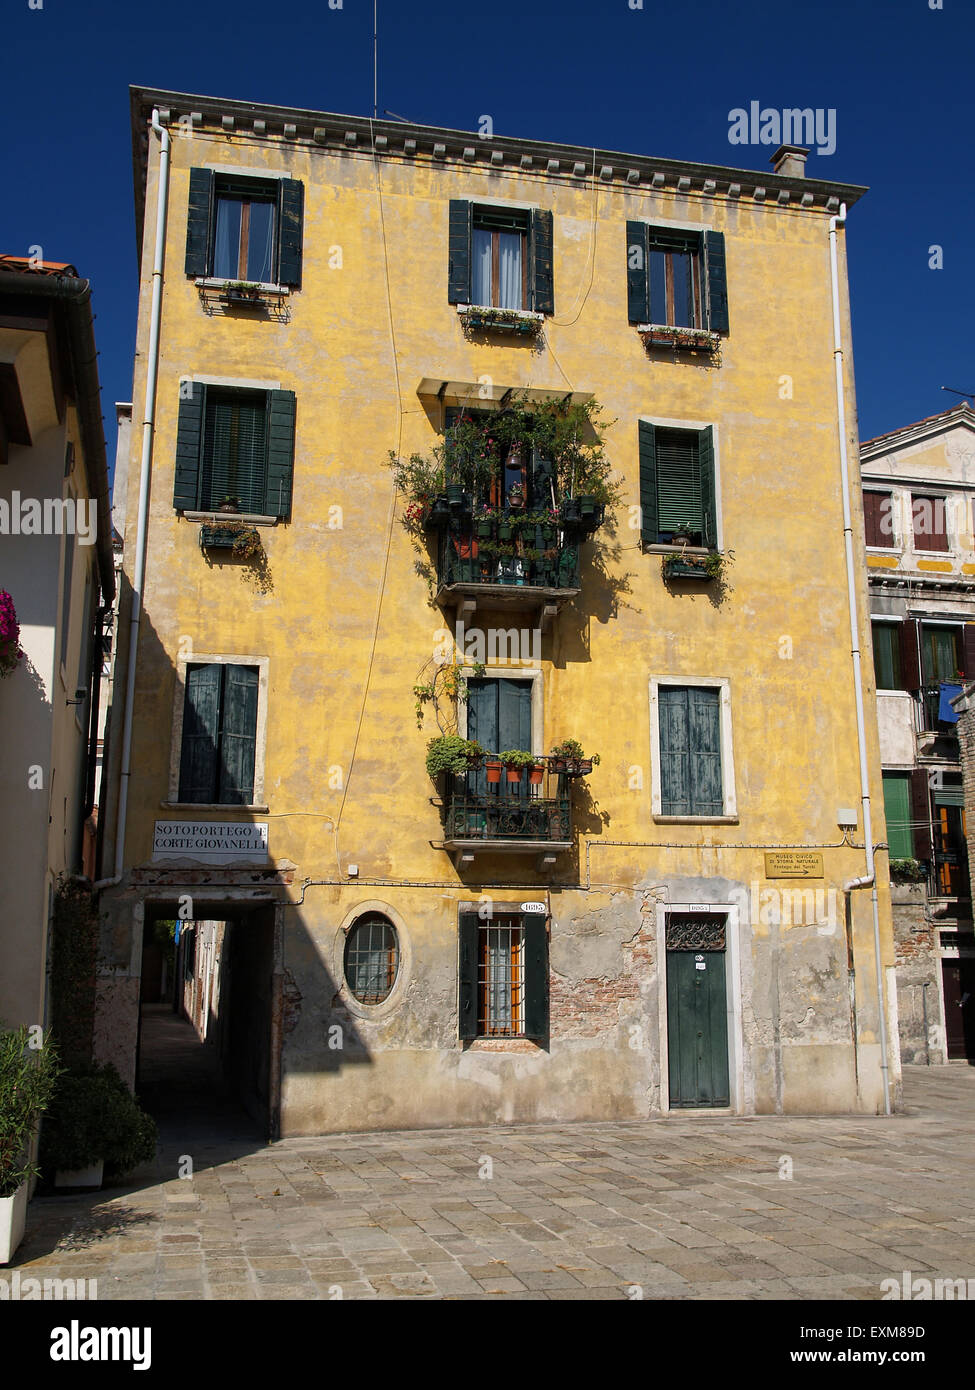 Old house with windows with green shutters in Venice, Italy. Stock Photo